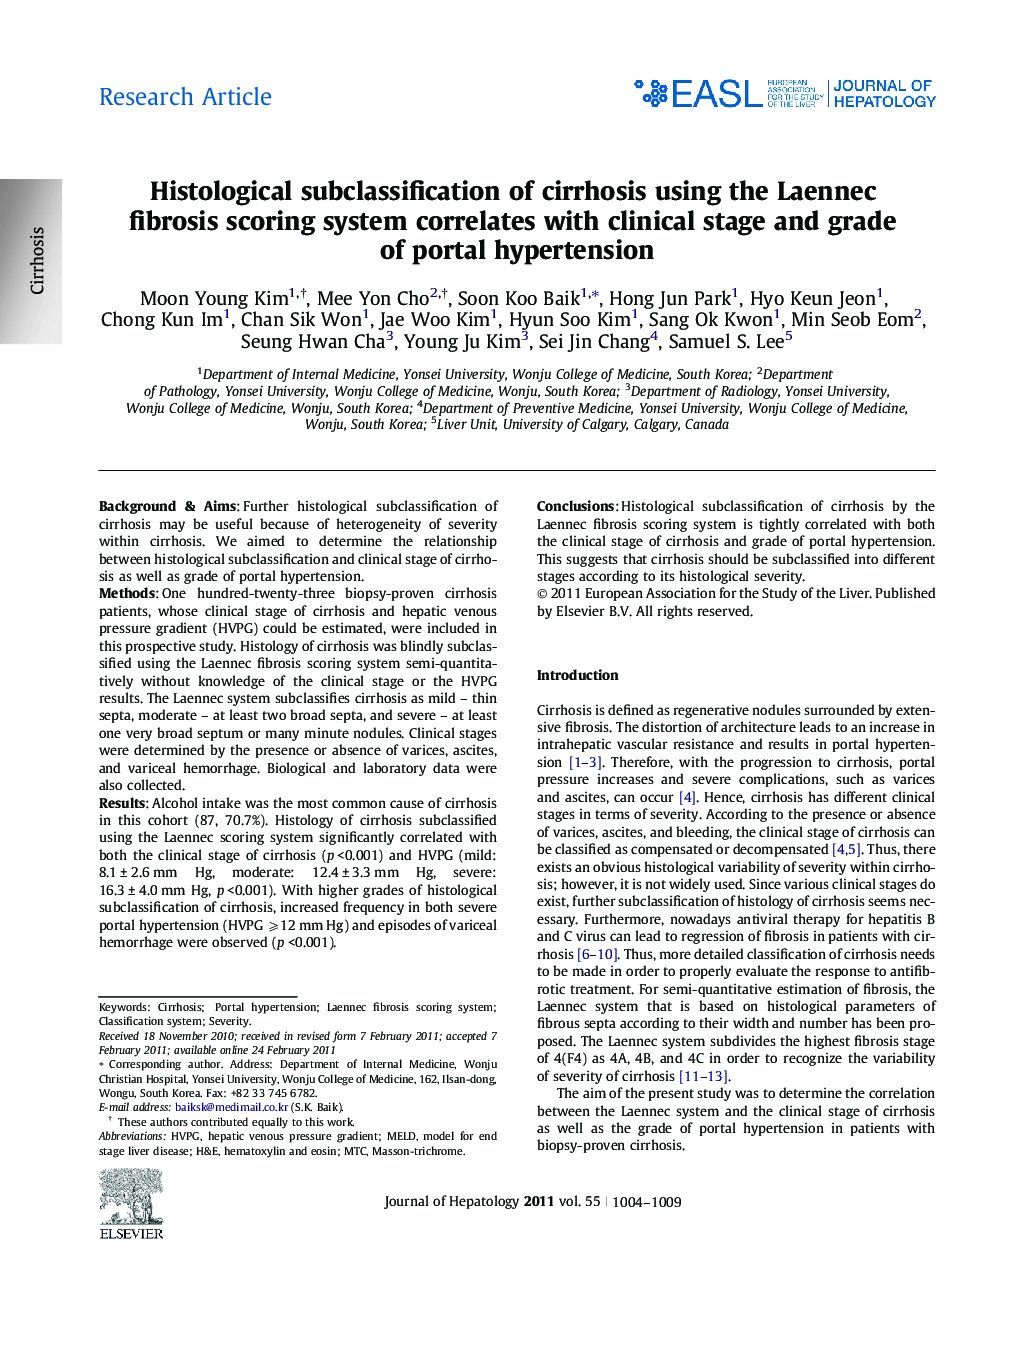 Research ArticleHistological subclassification of cirrhosis using the Laennec fibrosis scoring system correlates with clinical stage and grade of portal hypertension